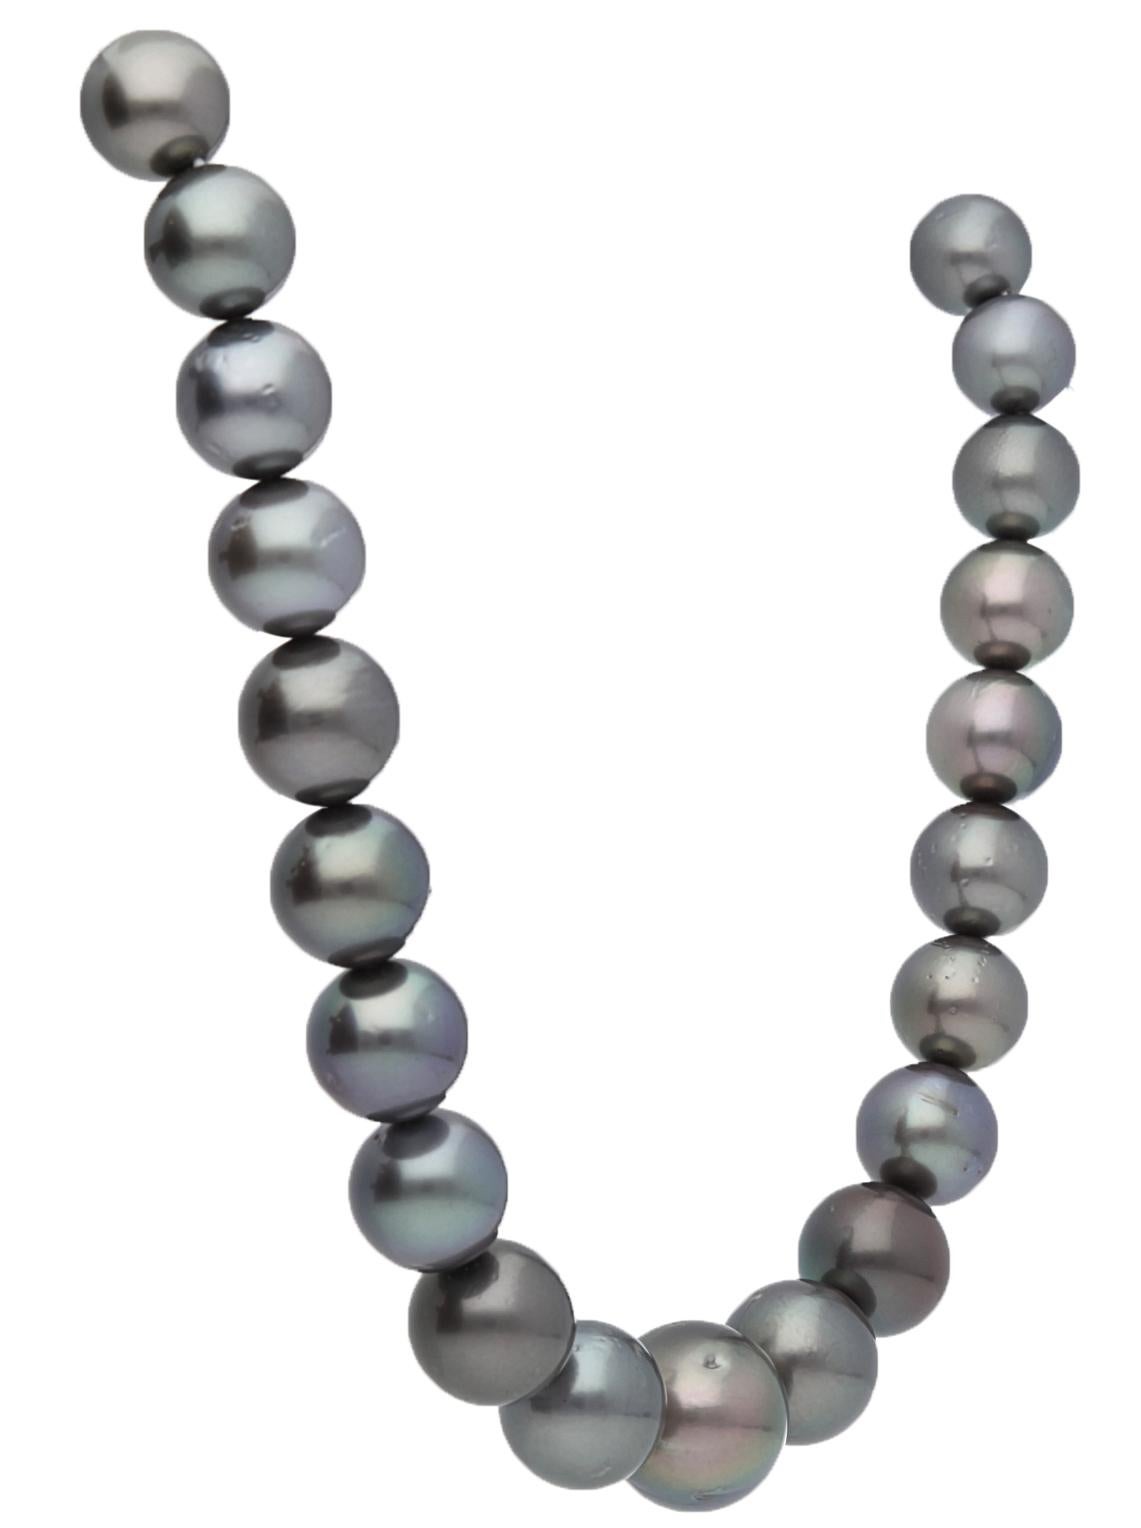 Tahitian South Sea Pearl Necklace ranging in size from 11 mm to 16 mm
Total pearls: 35
Total weight: ct 477
Total weight with tufts: 100 grams

Necklace without claps
Effective length without mounting: 43 cm

•THE MANUFACTURE IS MADE IN ITALY

•THE